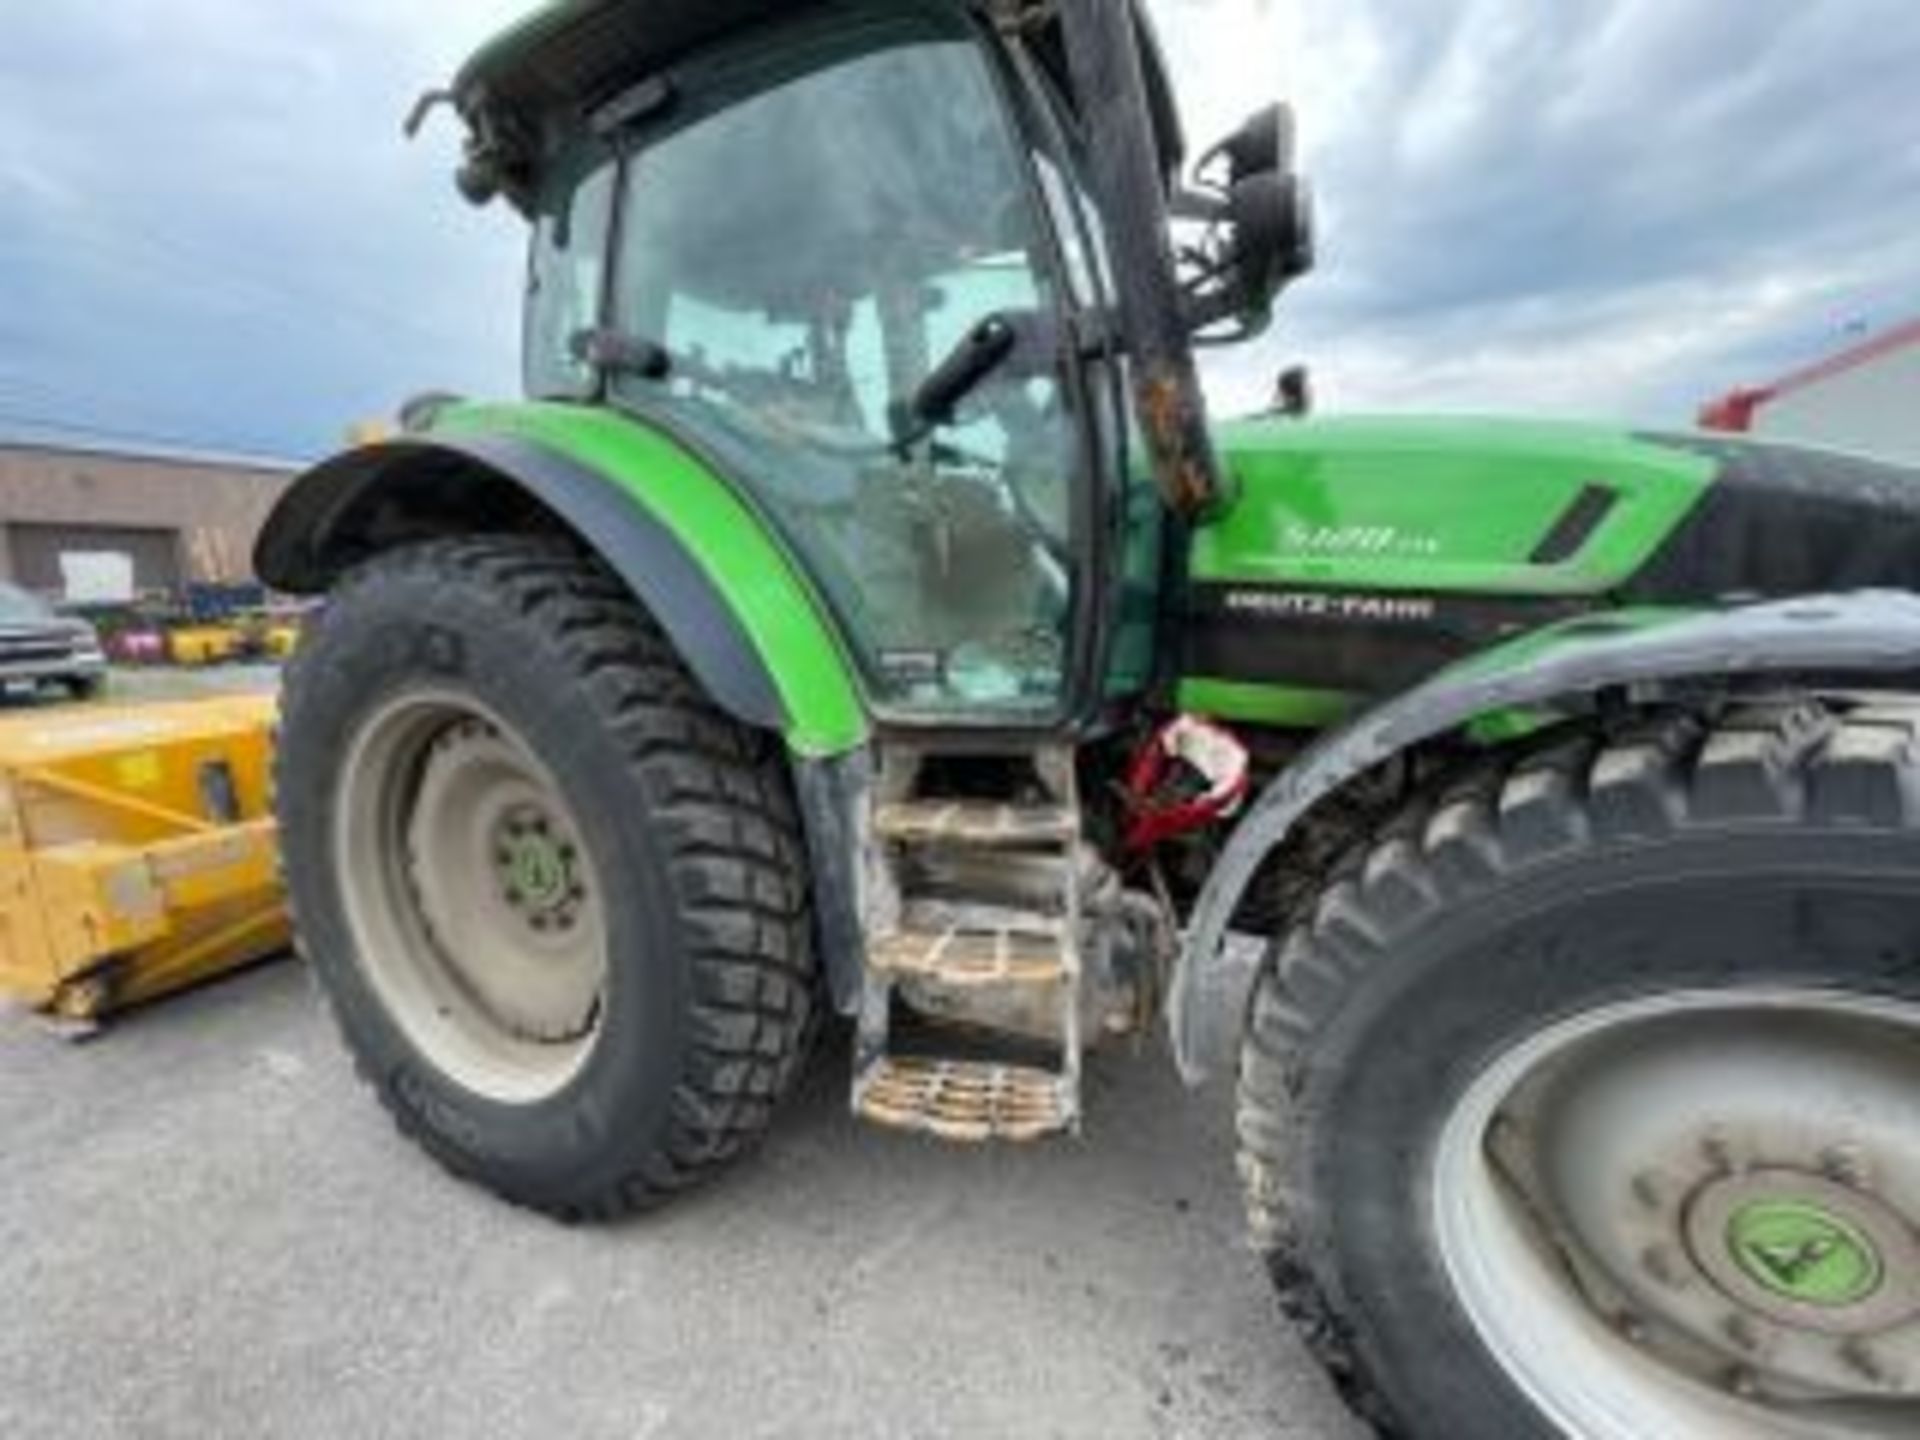 2018 DEUTZ-FAHR agricultural tractor # T51-10003 With PRONOVOST snow removal attachment 1109.8 Hours - Image 7 of 27